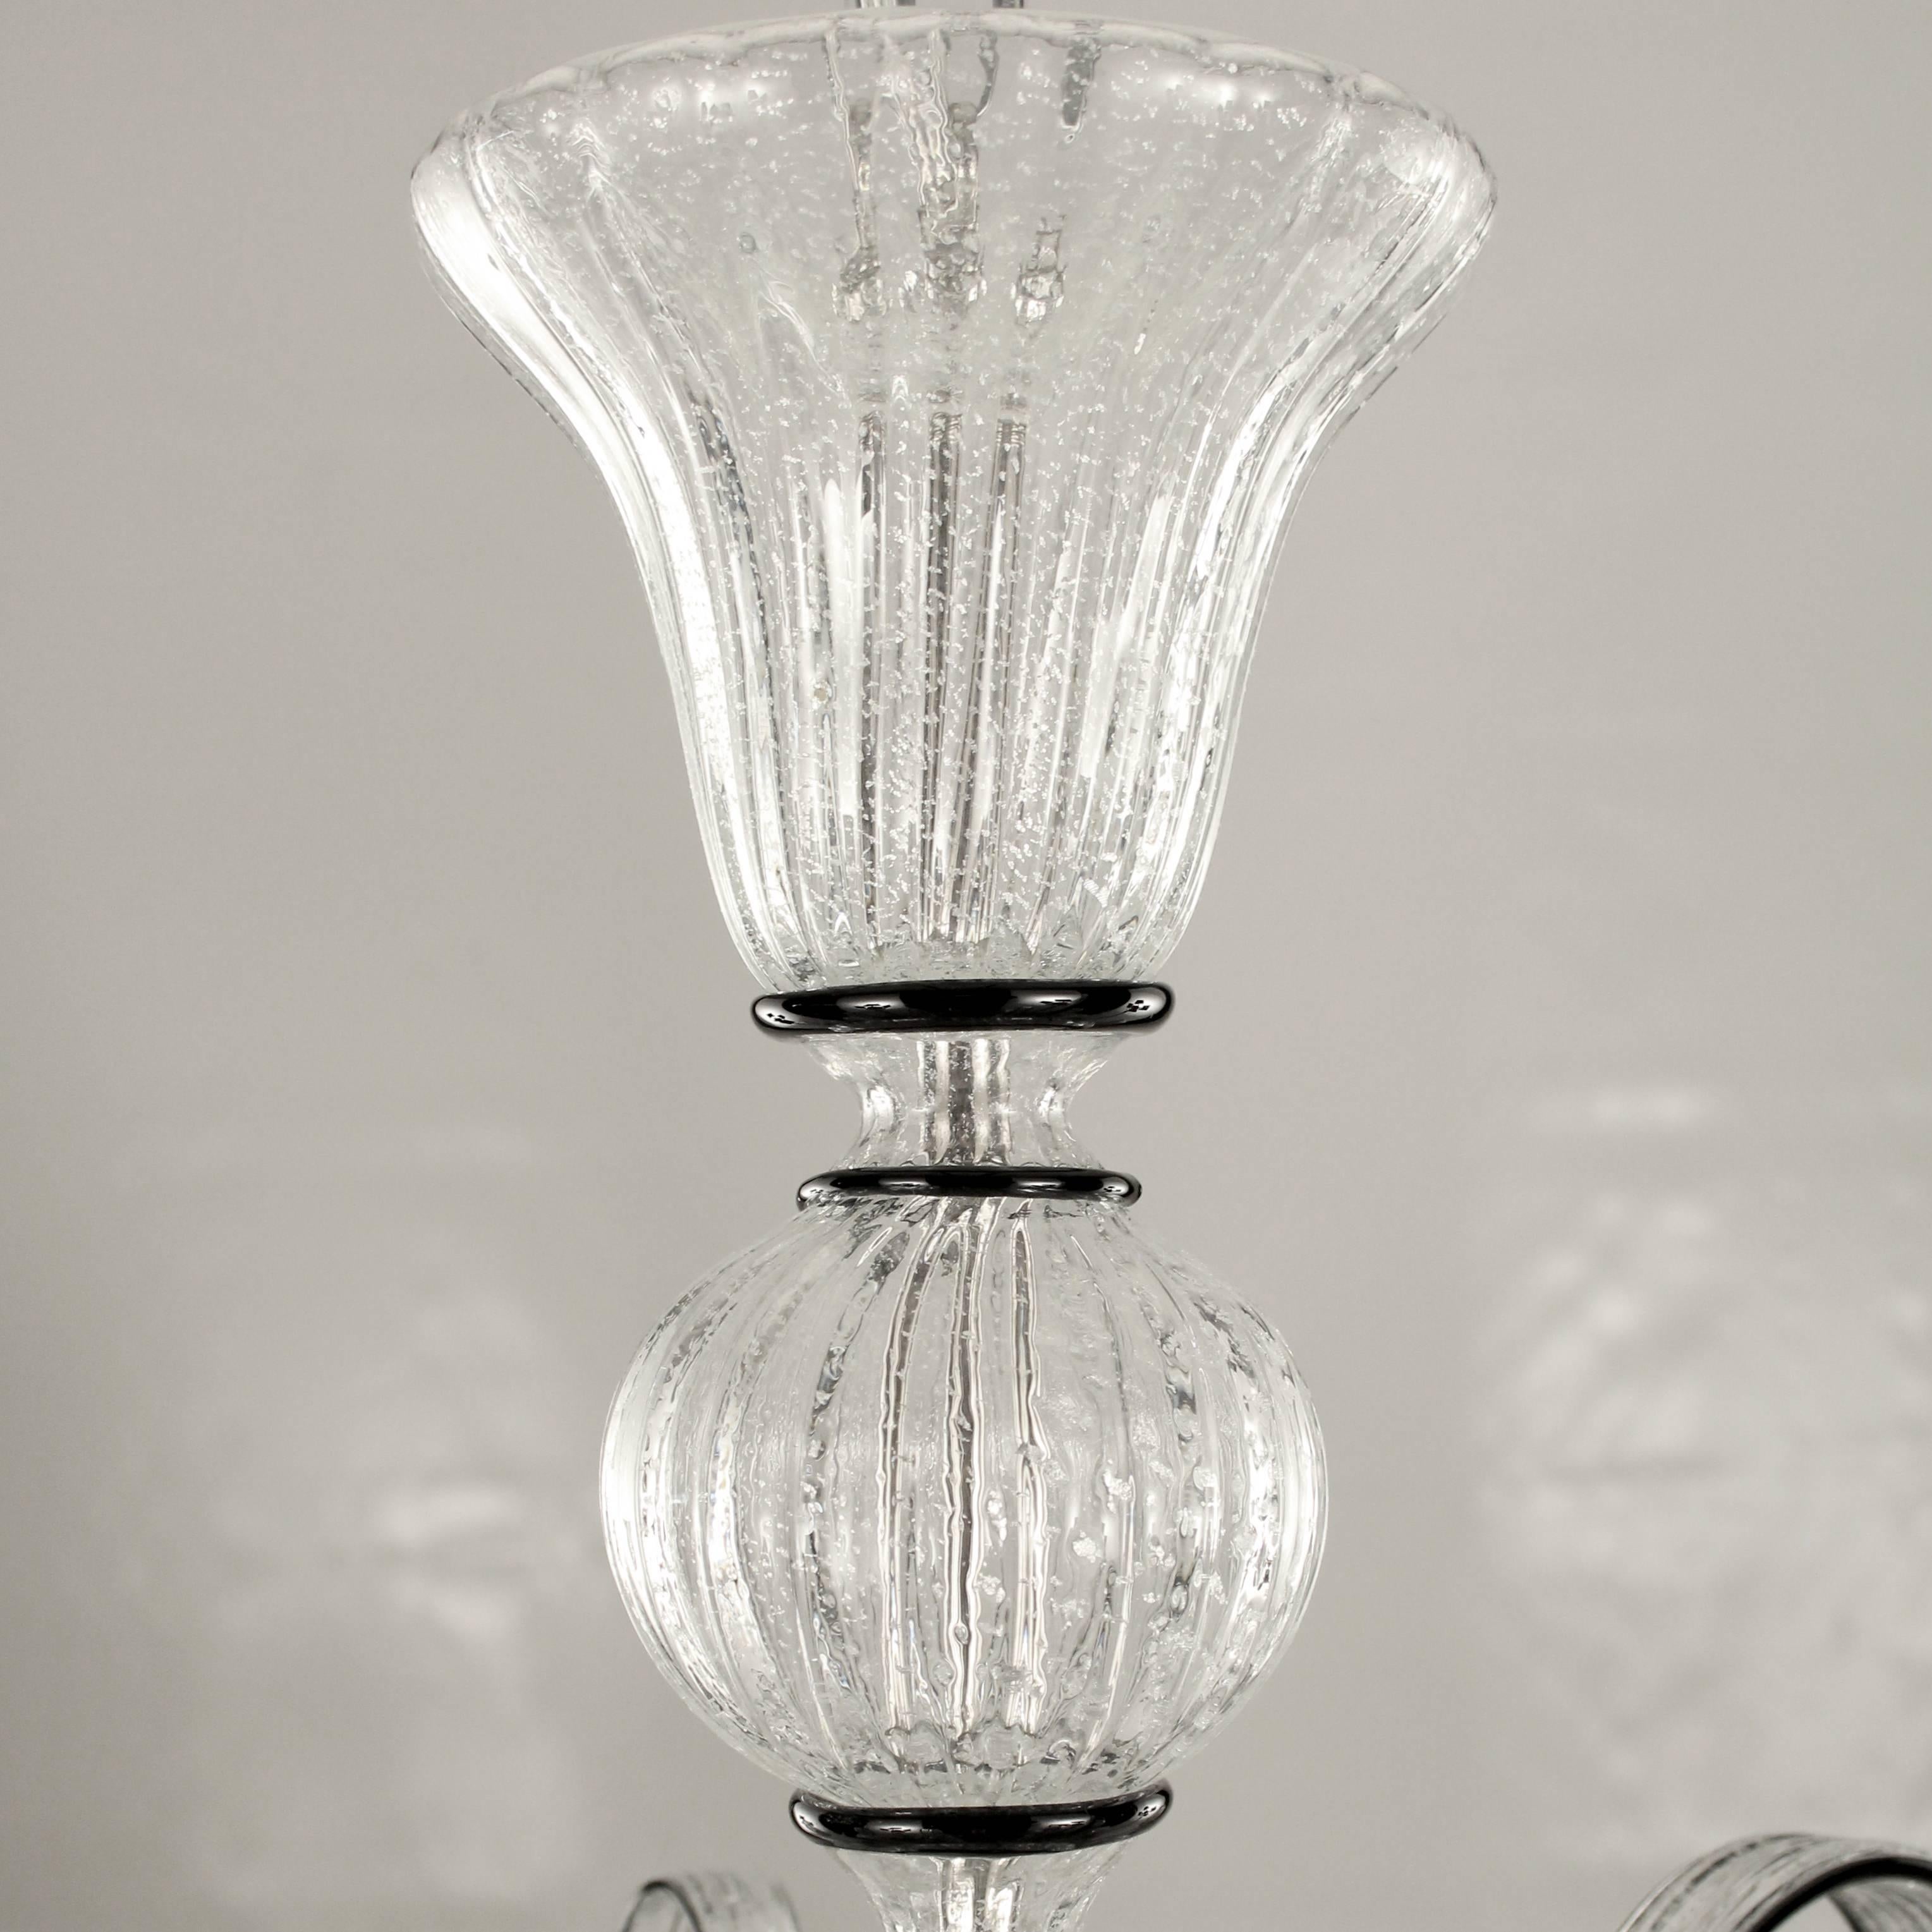 Chandelier Murano Blown Glass Silver Leaf and Black Trimmings, Italian  Style In Excellent Condition For Sale In Montichiari, IT